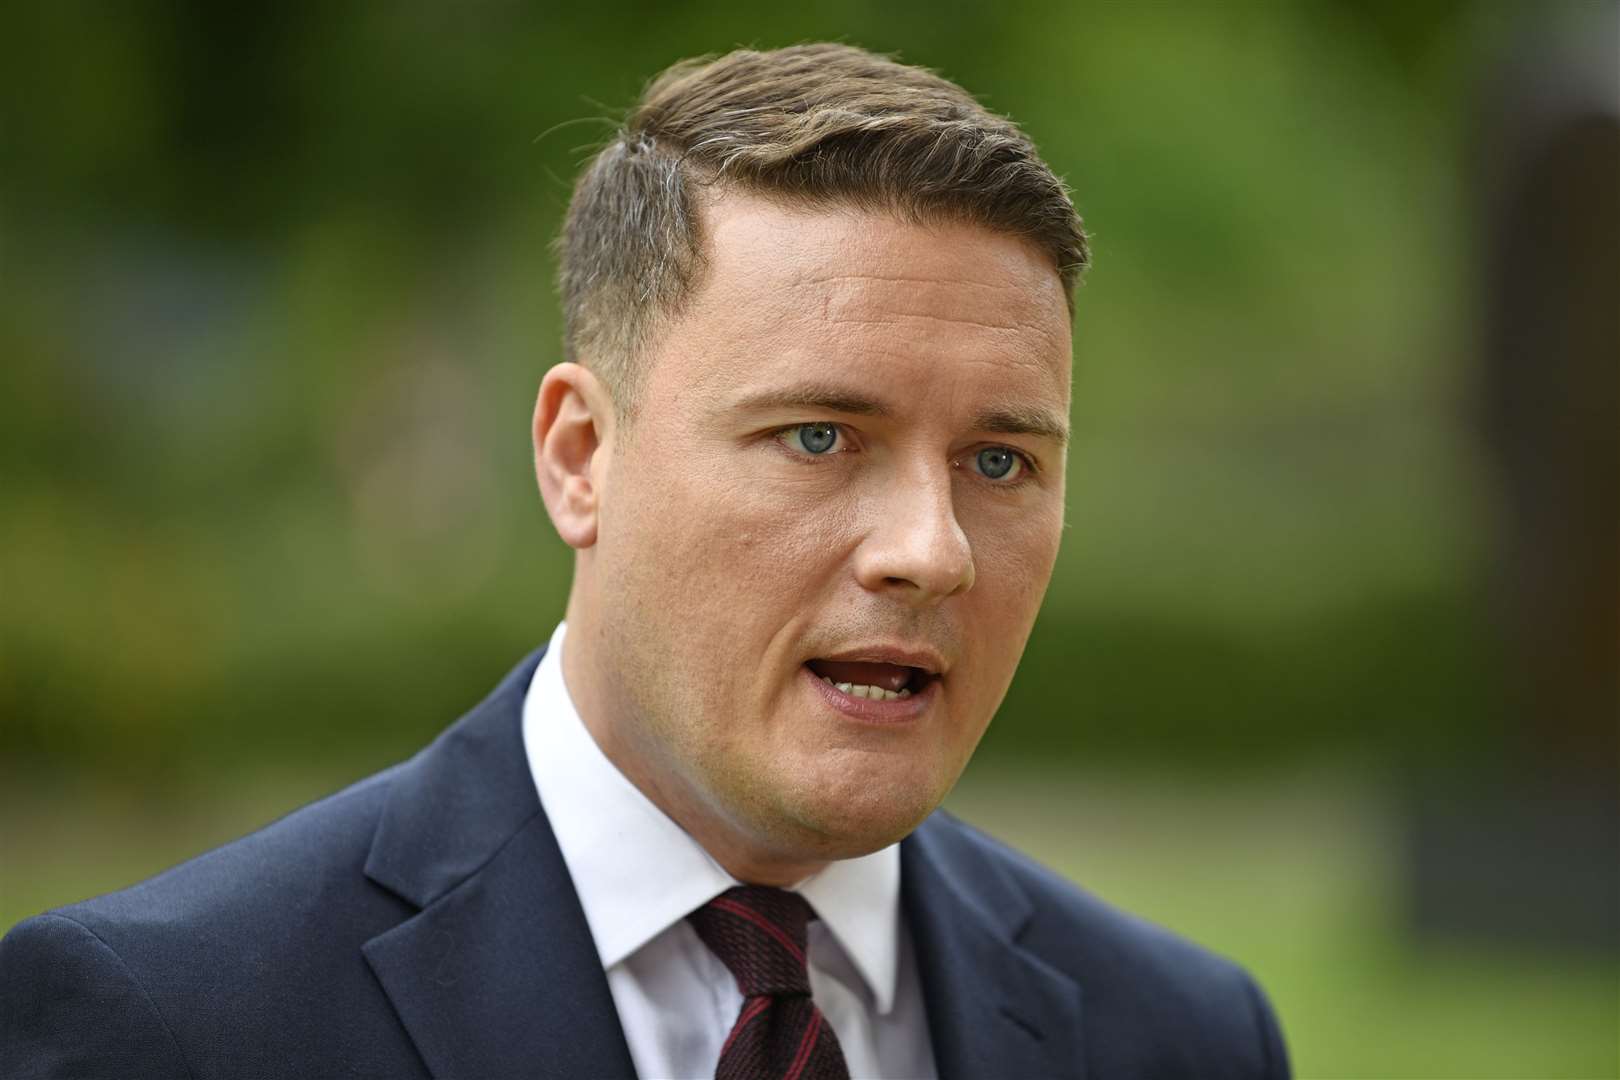 Wes Streeting (Beresford Hodge/PA)